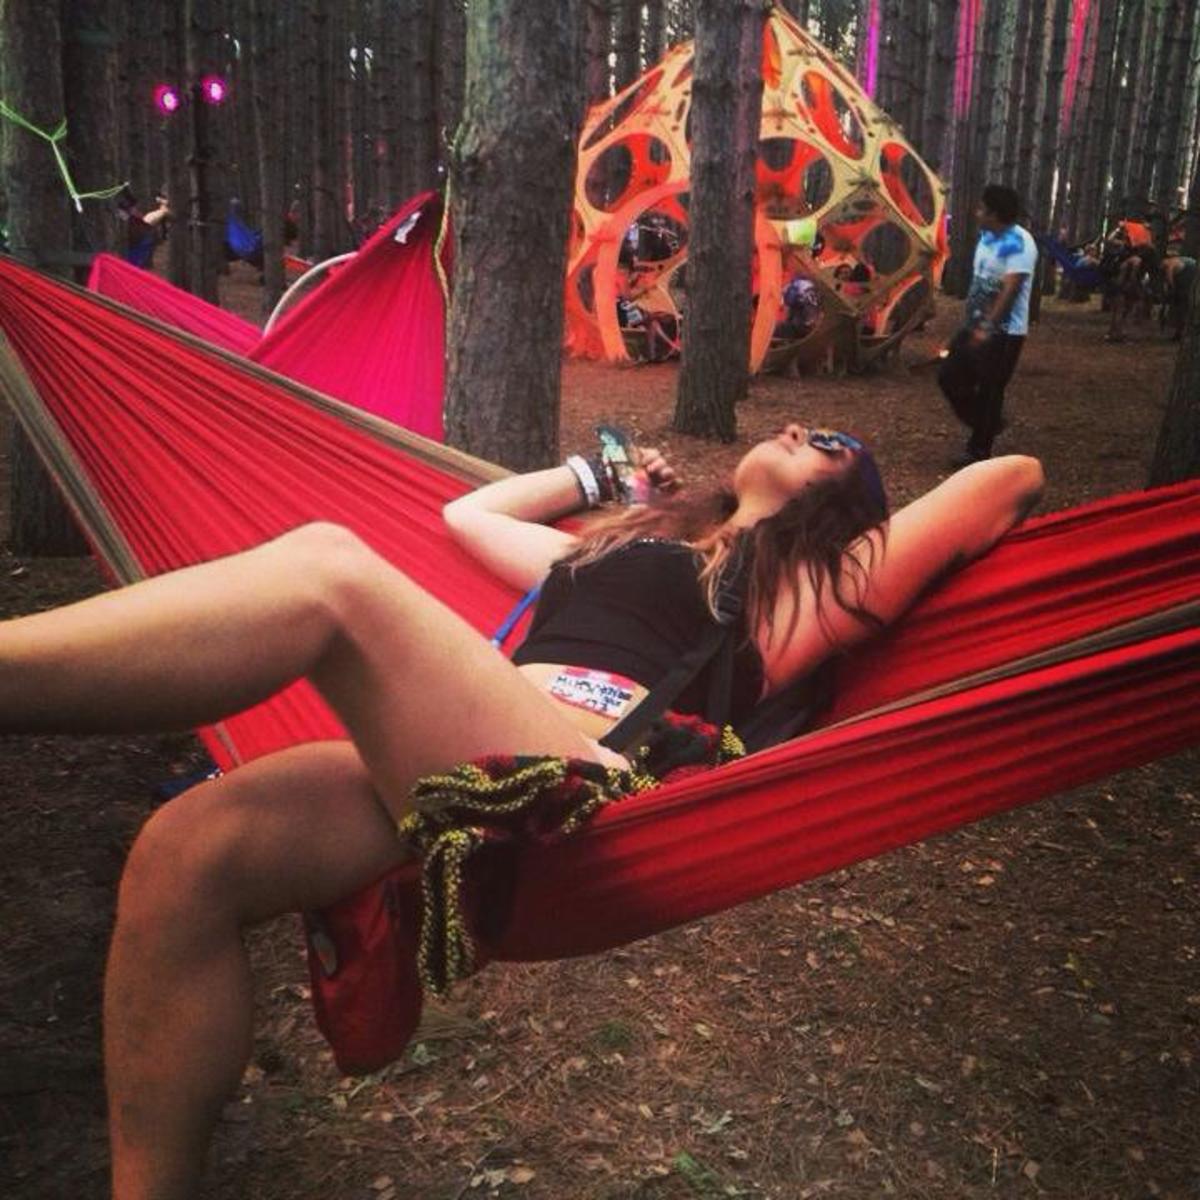 Sit back and take a breath! Sherwood Forest, Electric Forest 2014.